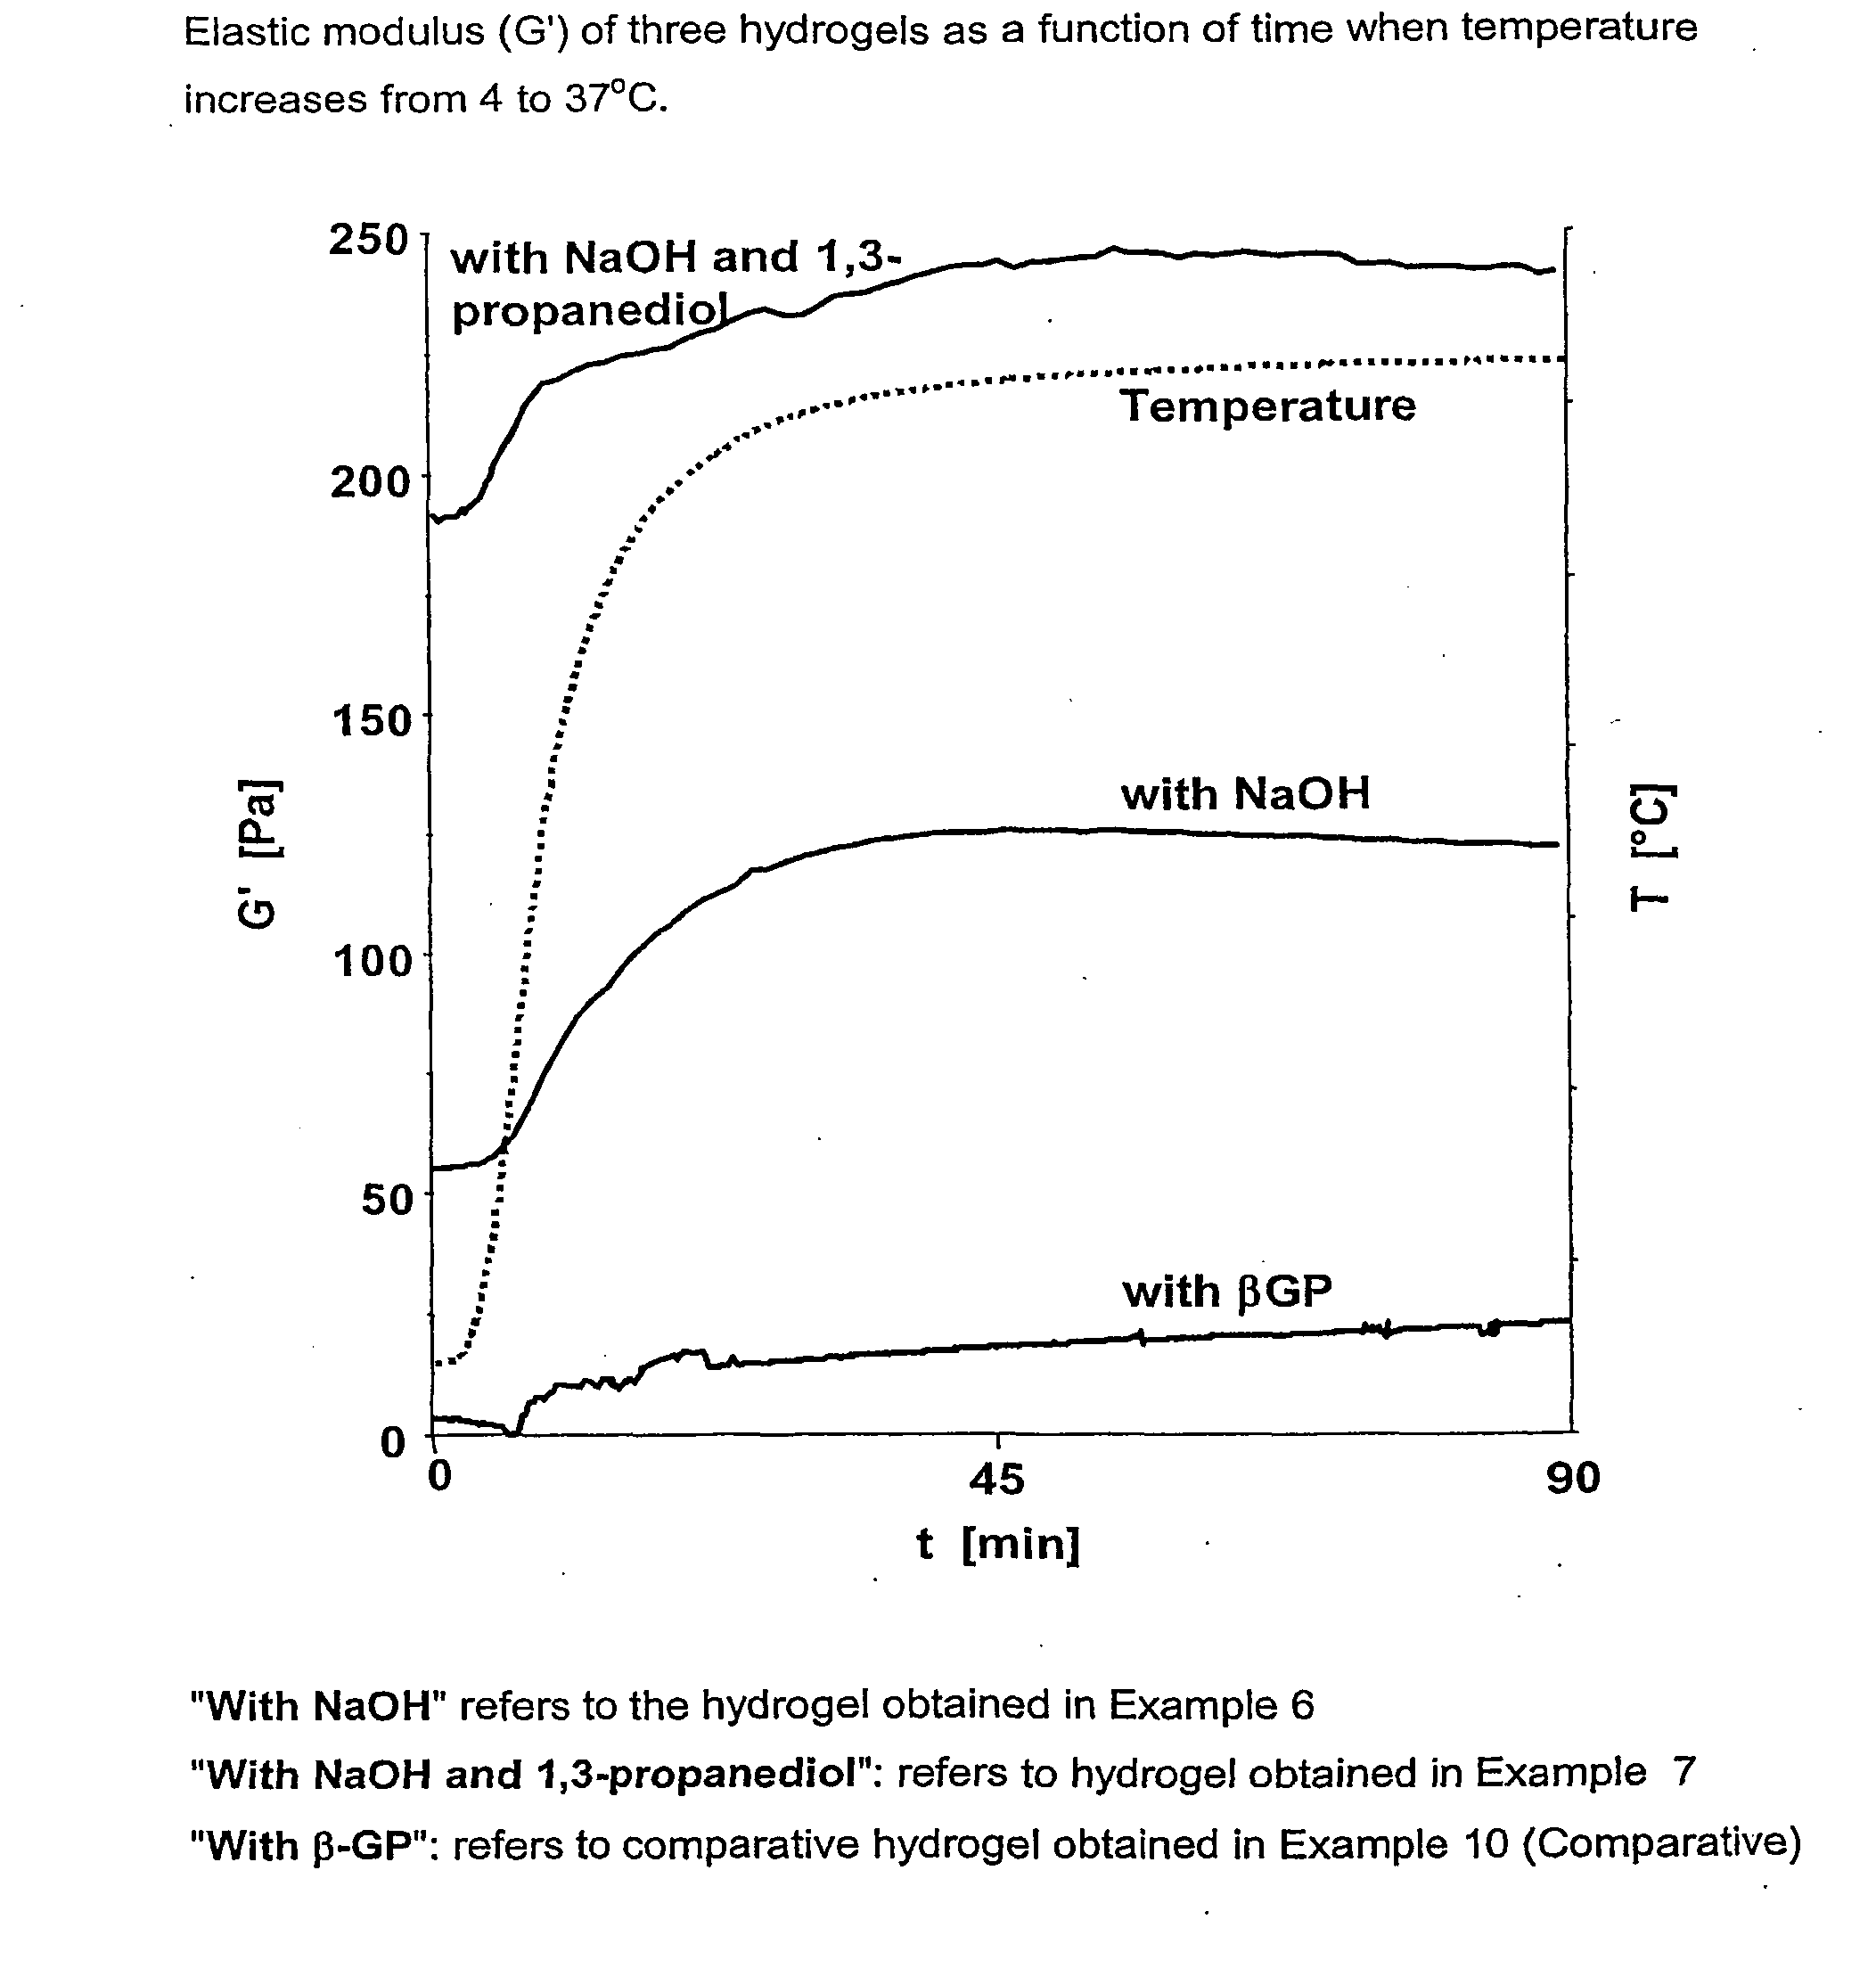 Pseudo-thermosetting neutralized chitosan composition forming a hydrogel and a process for producing the same